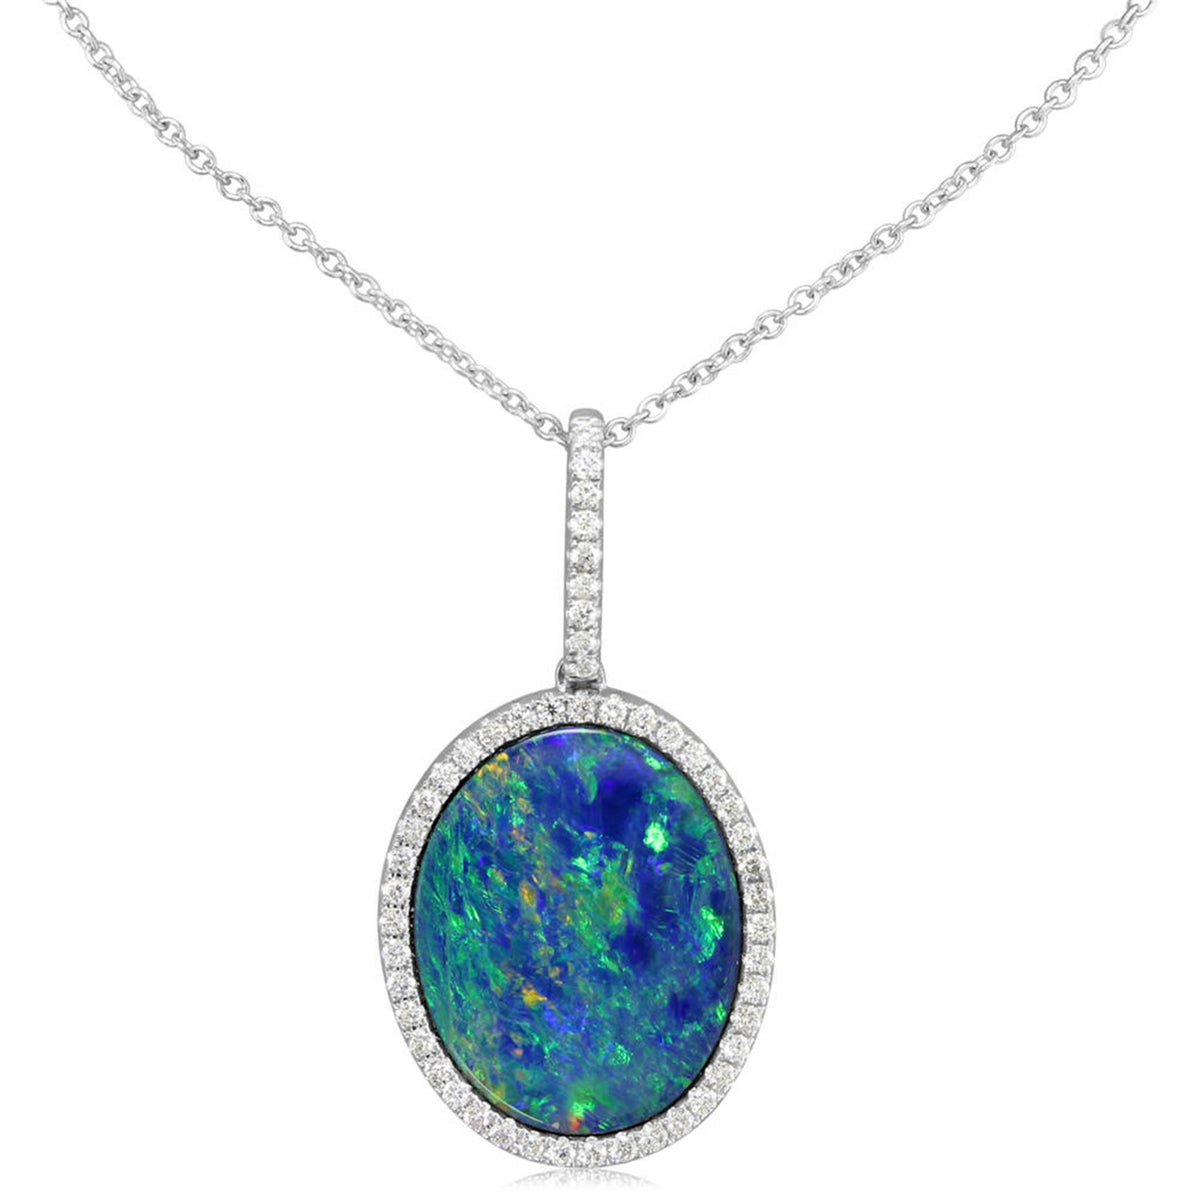 14Kt White Gold Halo Pendant With 7.24ct Australian Opal Doublet